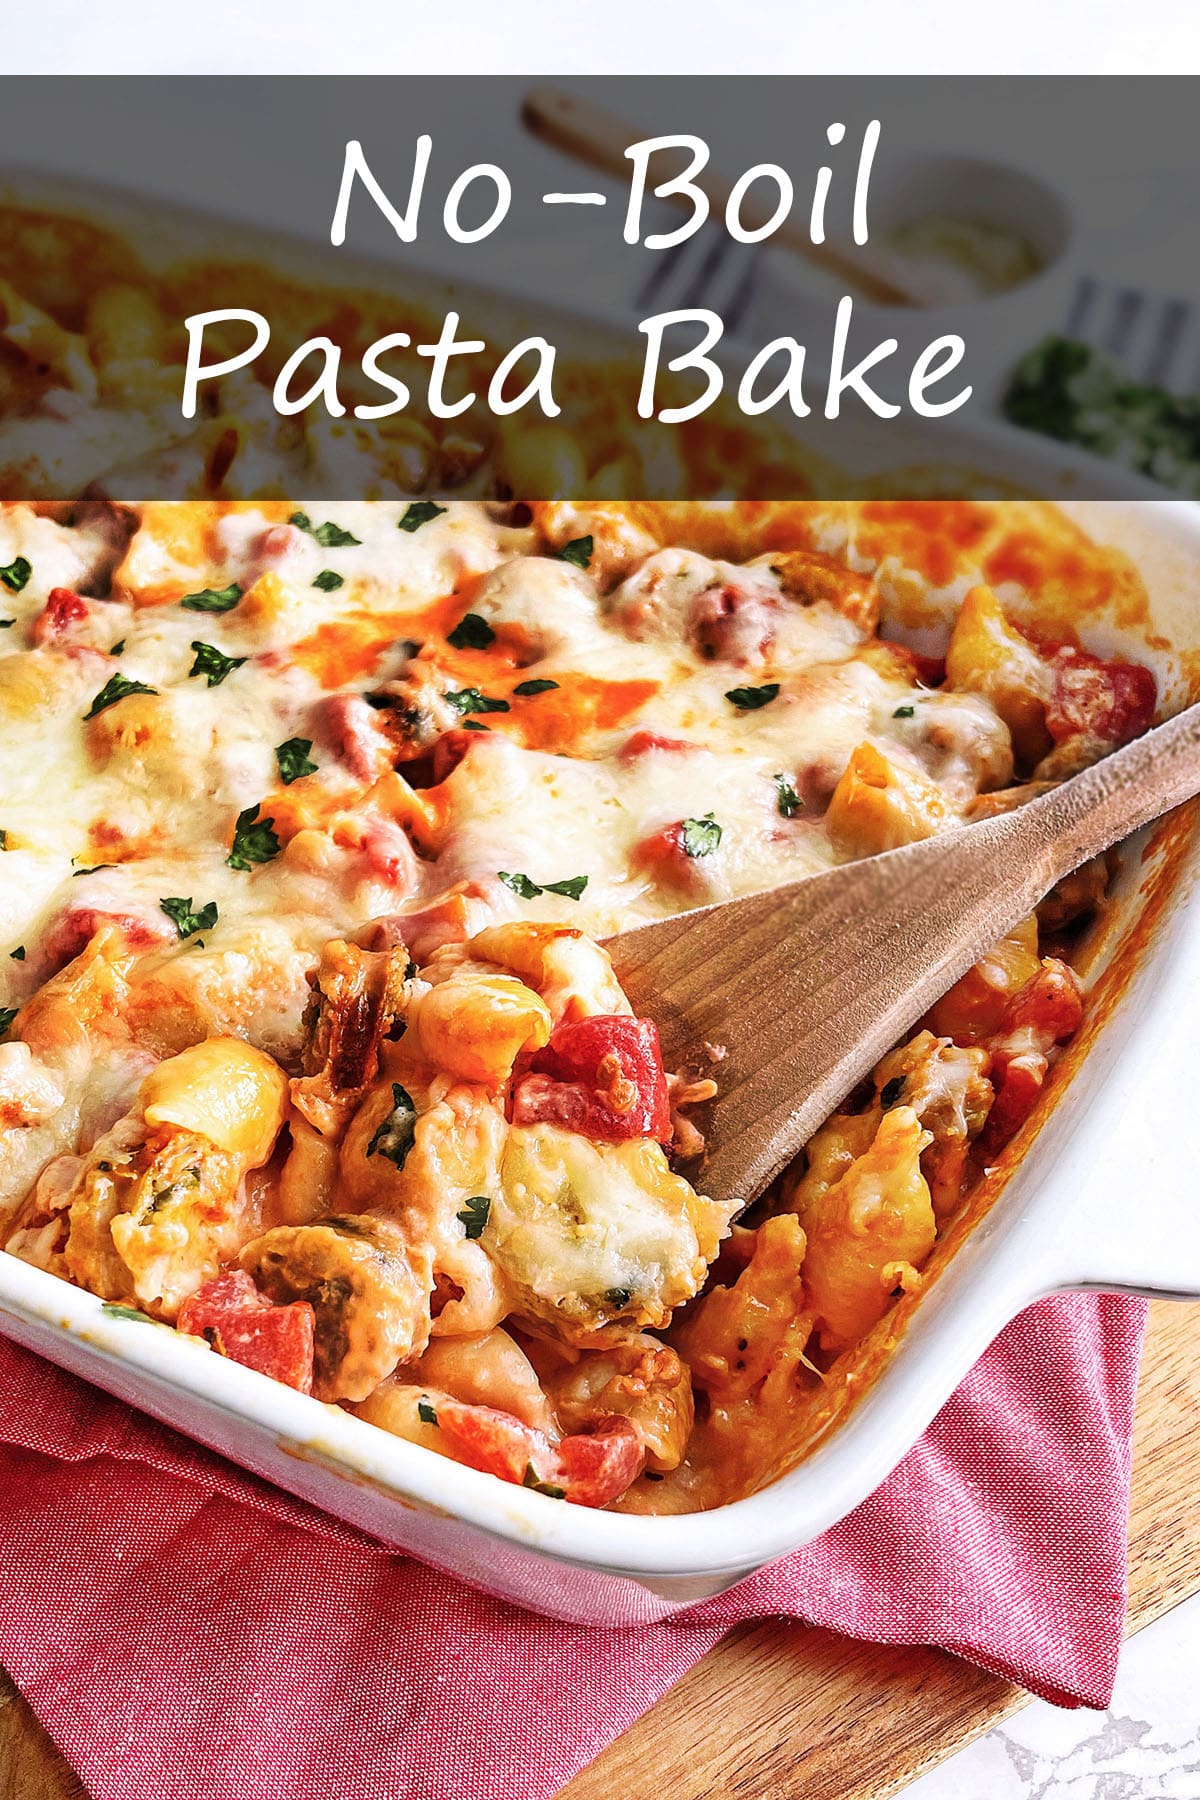 No-Boil Pasta Bake (Yes, it really works! And it uses only one pan!)